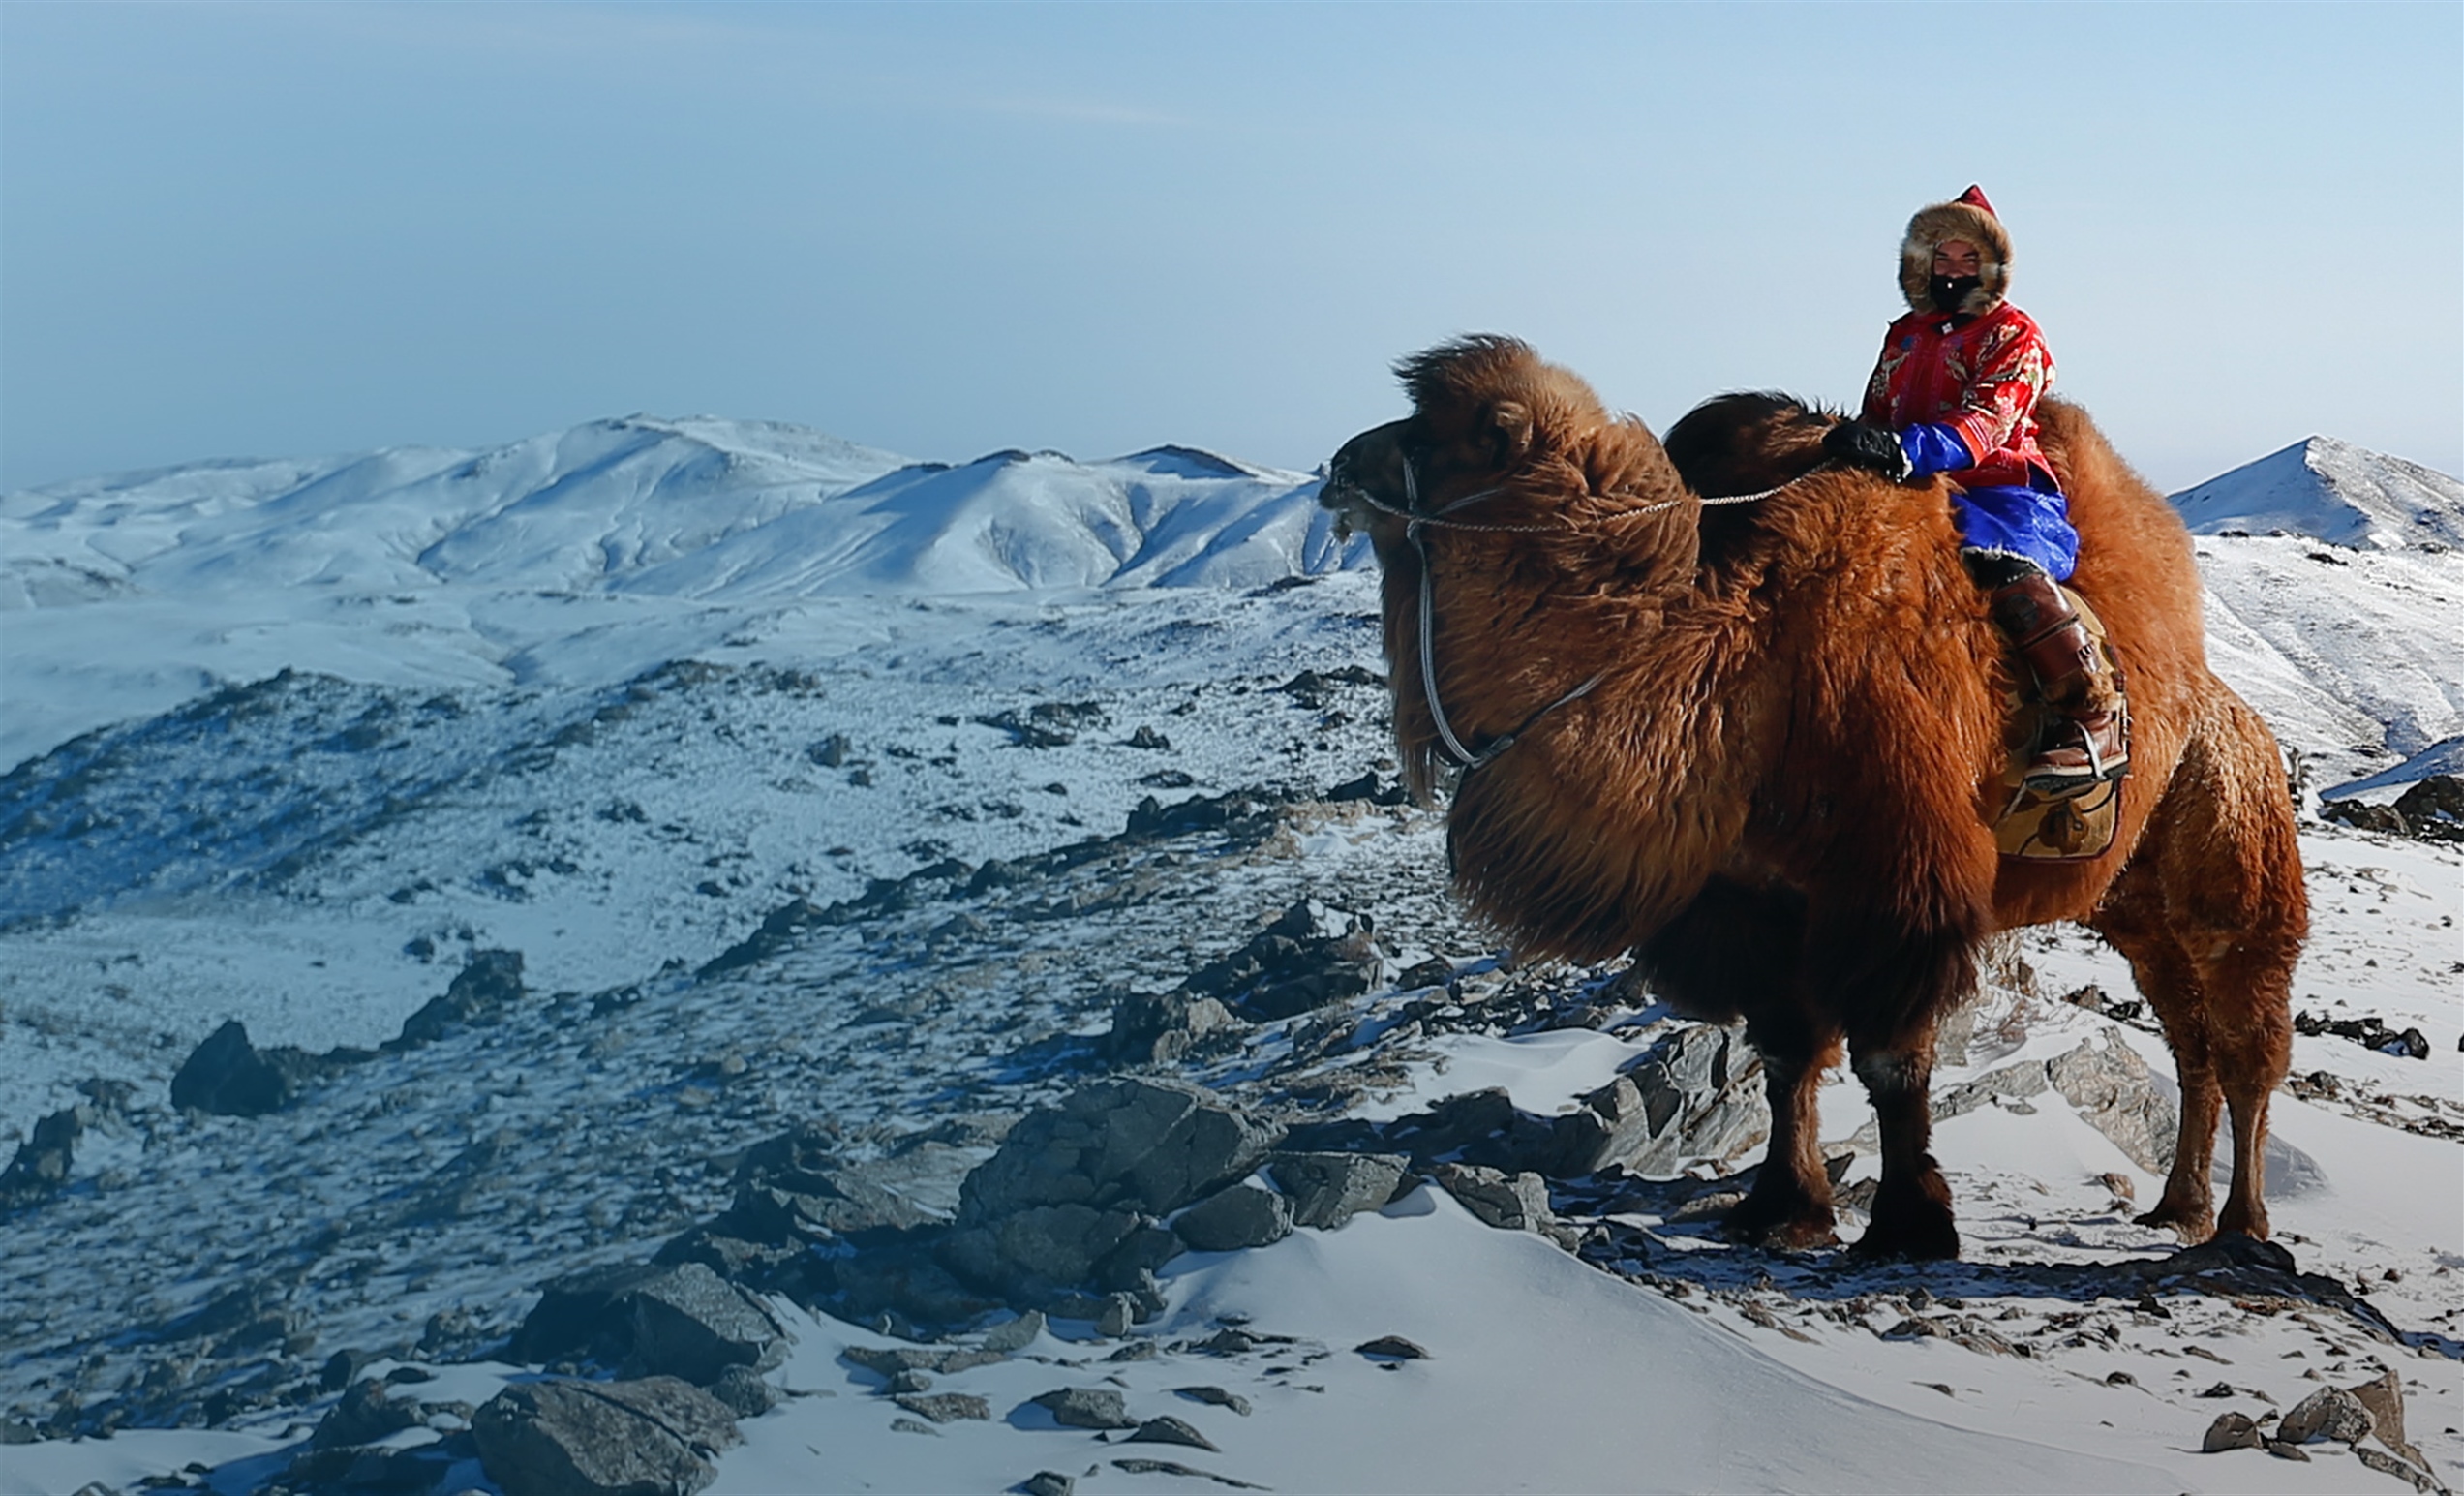 Cold Camel Expedition Follow Kelly Wilsons’ adventures on her wild ride across the Gobi Desert